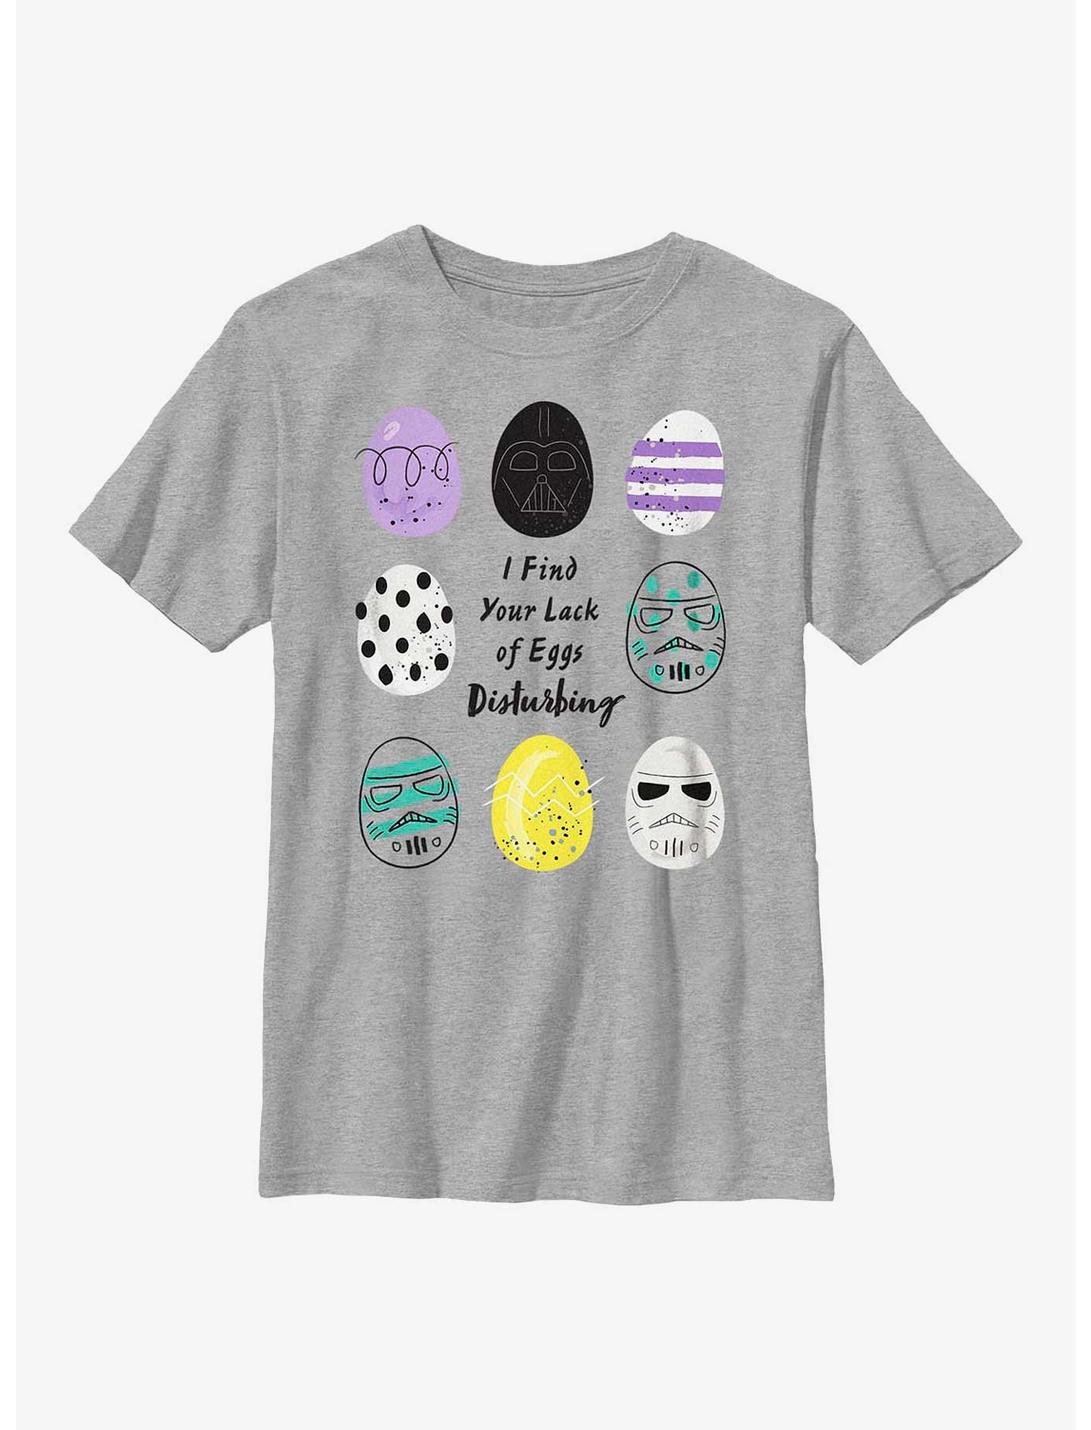 Star Wars Lack of Easter Eggs Disturbing Youth T-Shirt, ATH HTR, hi-res